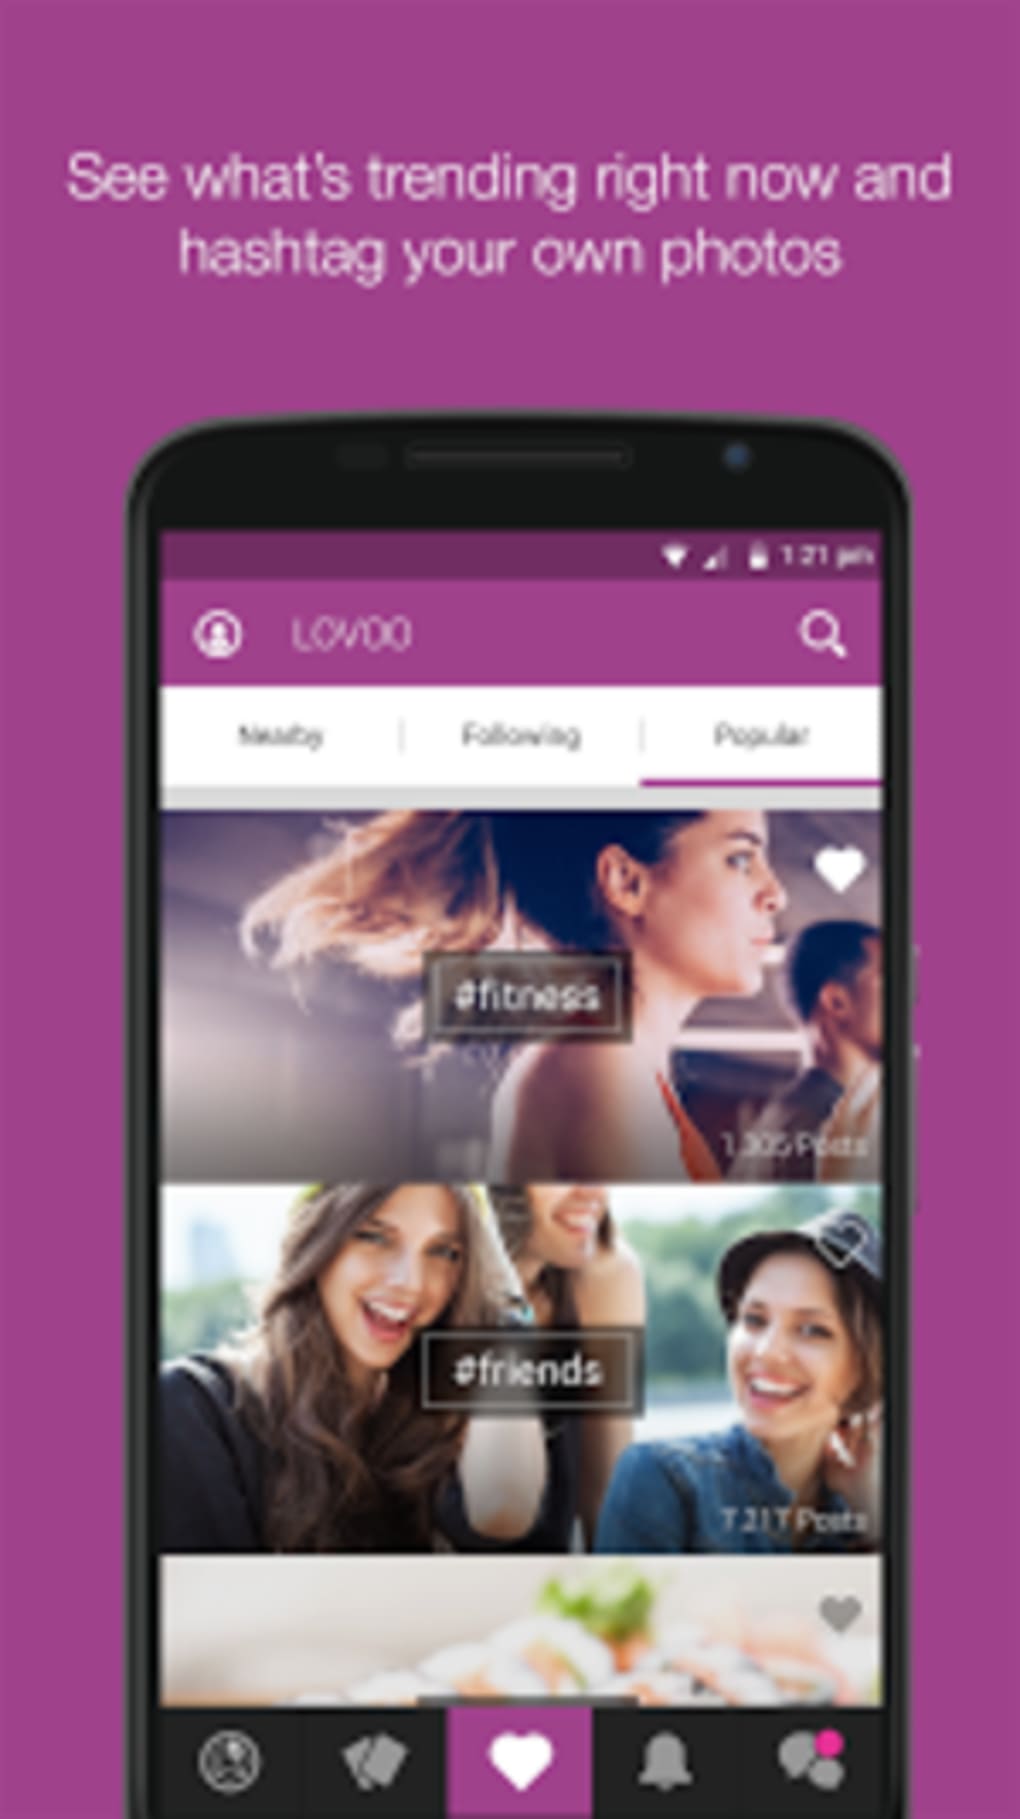 Lovoo android apk